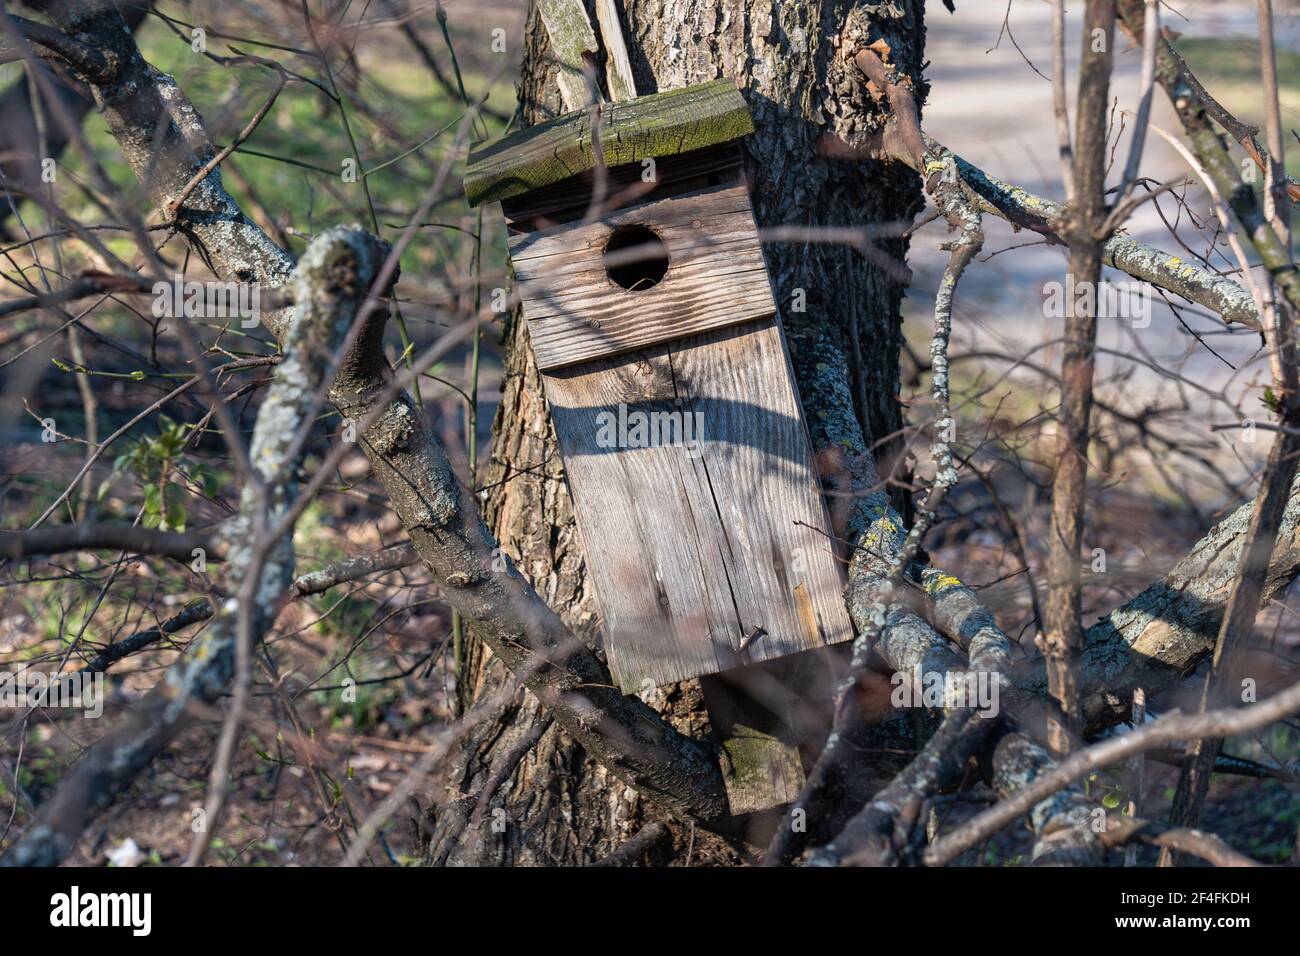 Fallen nest box stuck in branches at the bottom of a tree Stock Photo